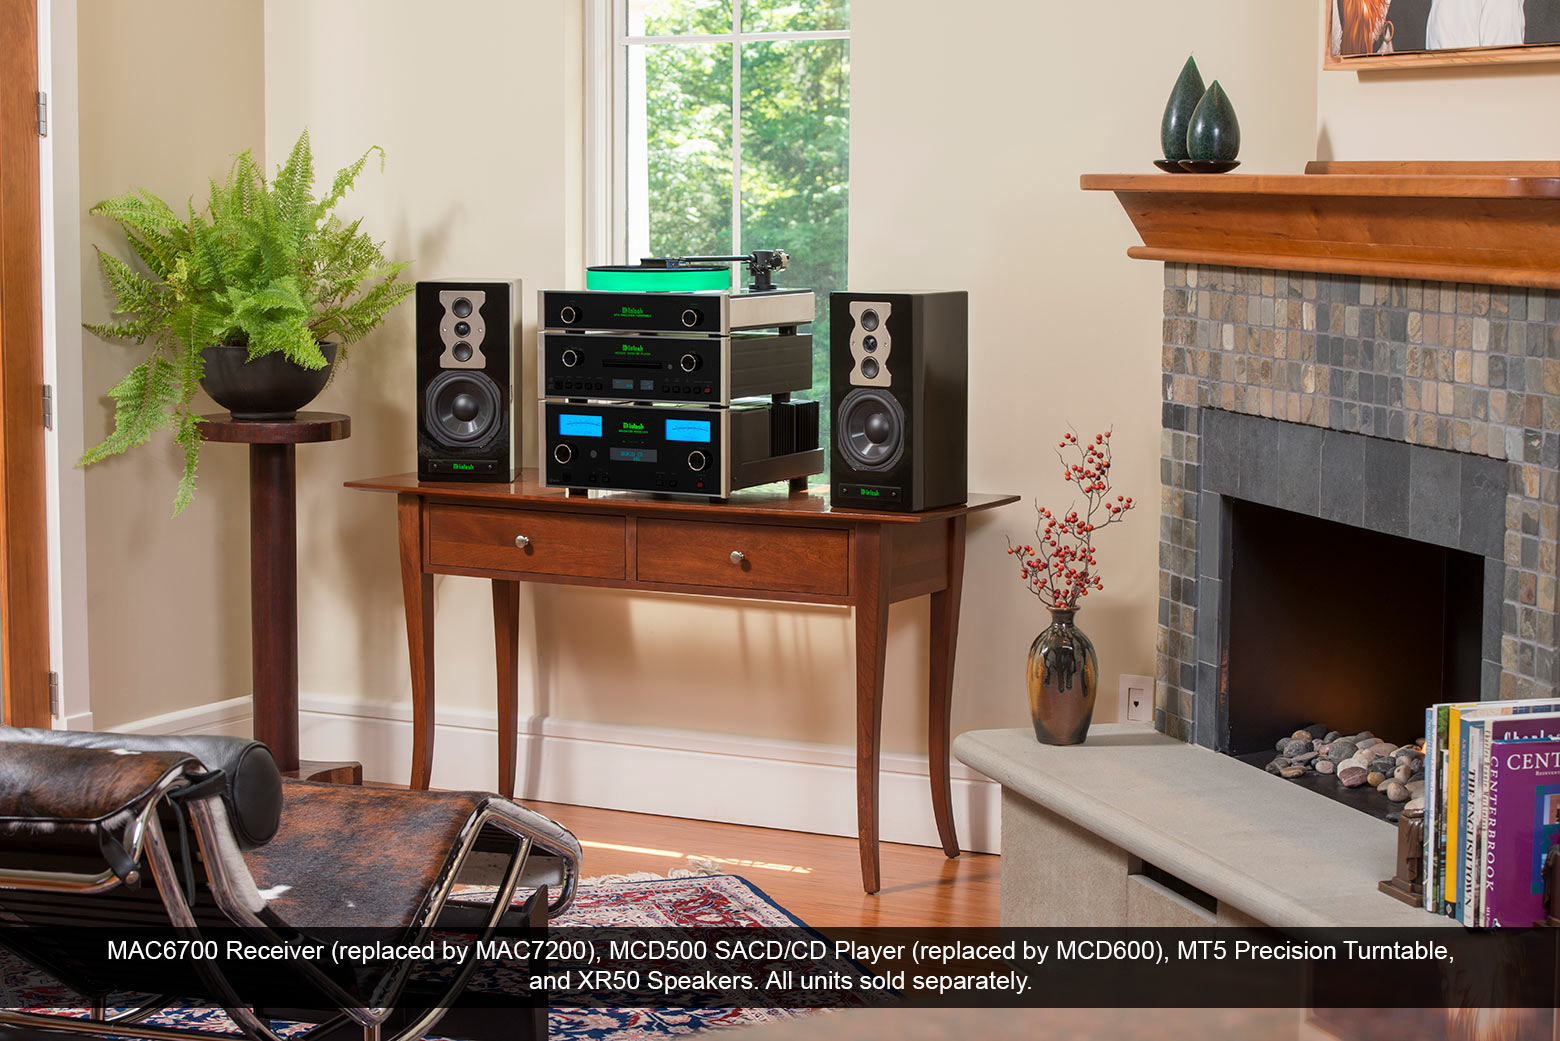 McIntosh MAC6700 Receiver, MCD500 SACD/CD Player, MT5 Precision Turntable, and XR50 Speakers